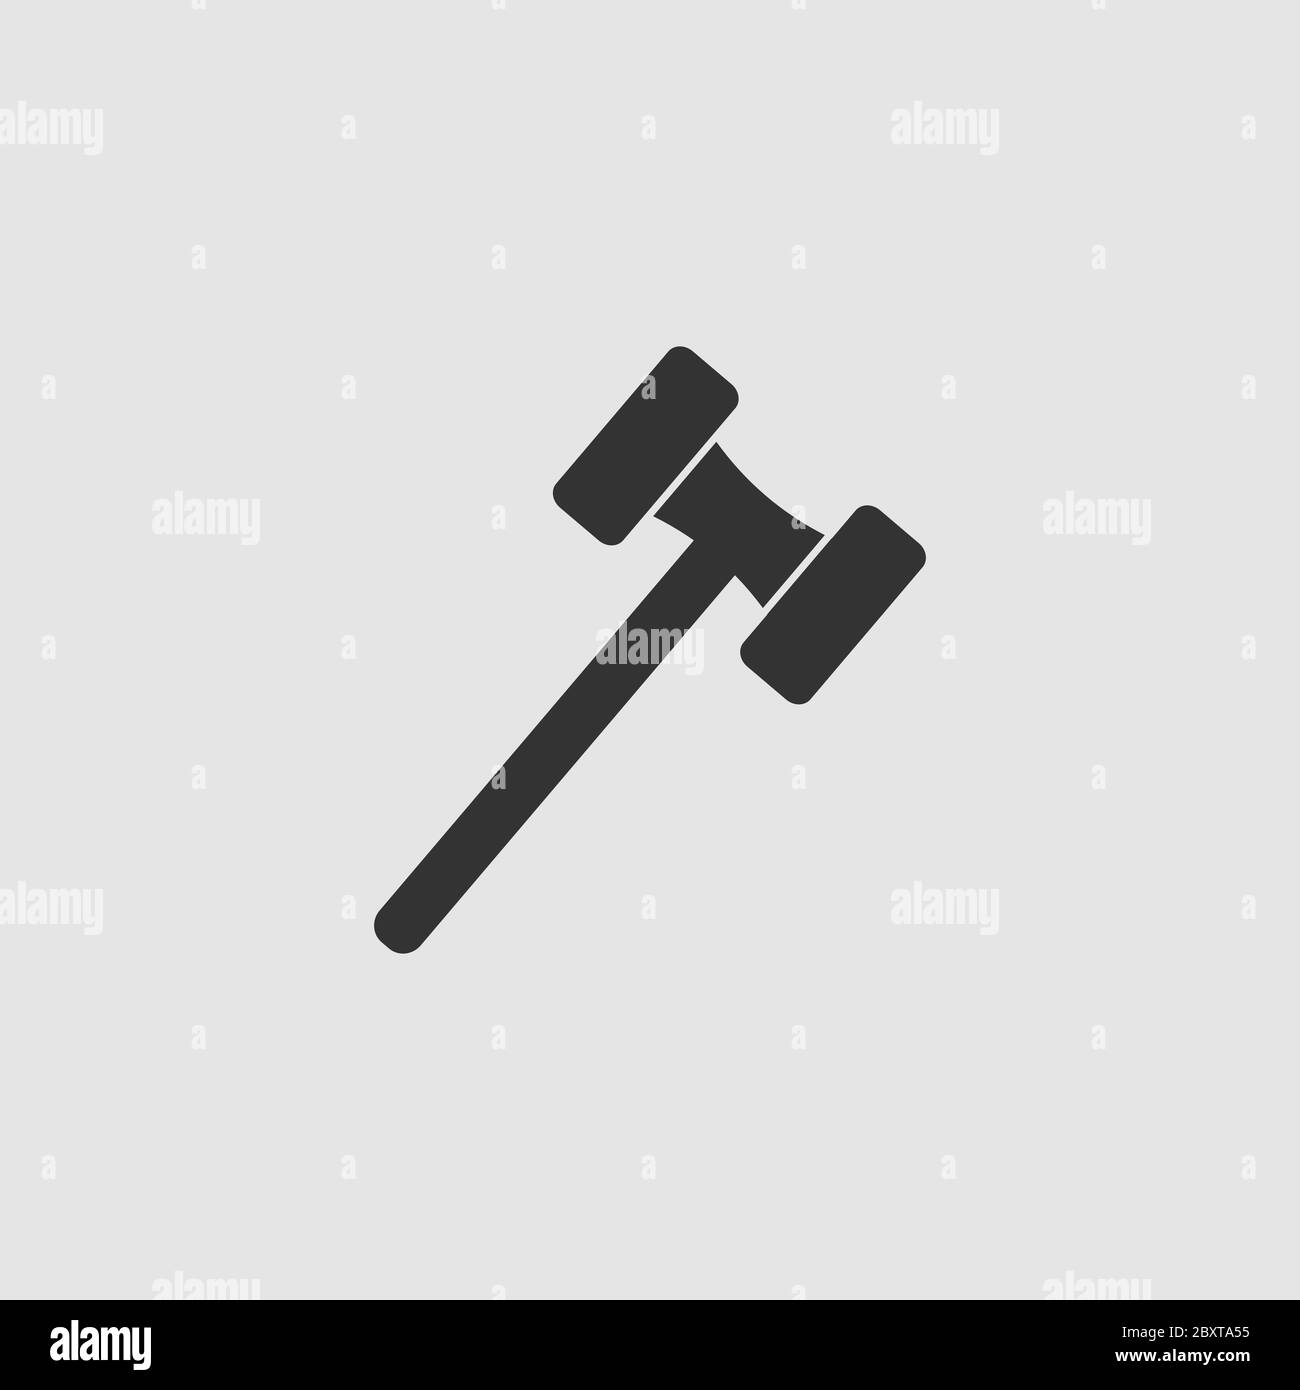 Rubber hammer Black and White Stock Photos & Images - Alamy